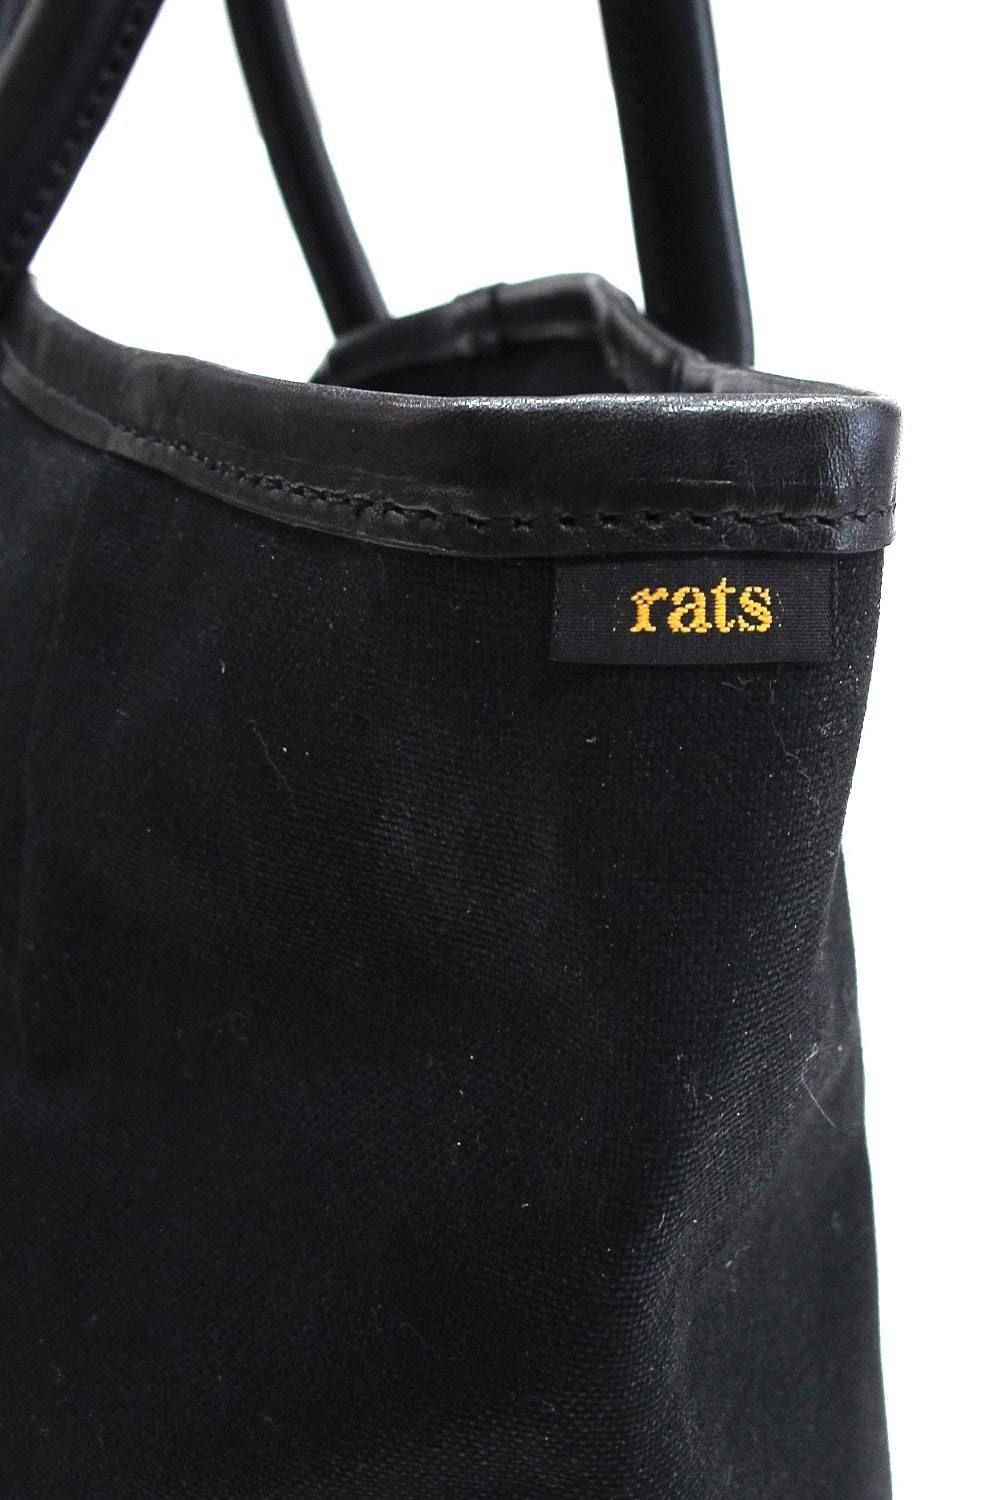 RATS - JAM CASE TYPE-5 collaboration with PORTER (BLACK 